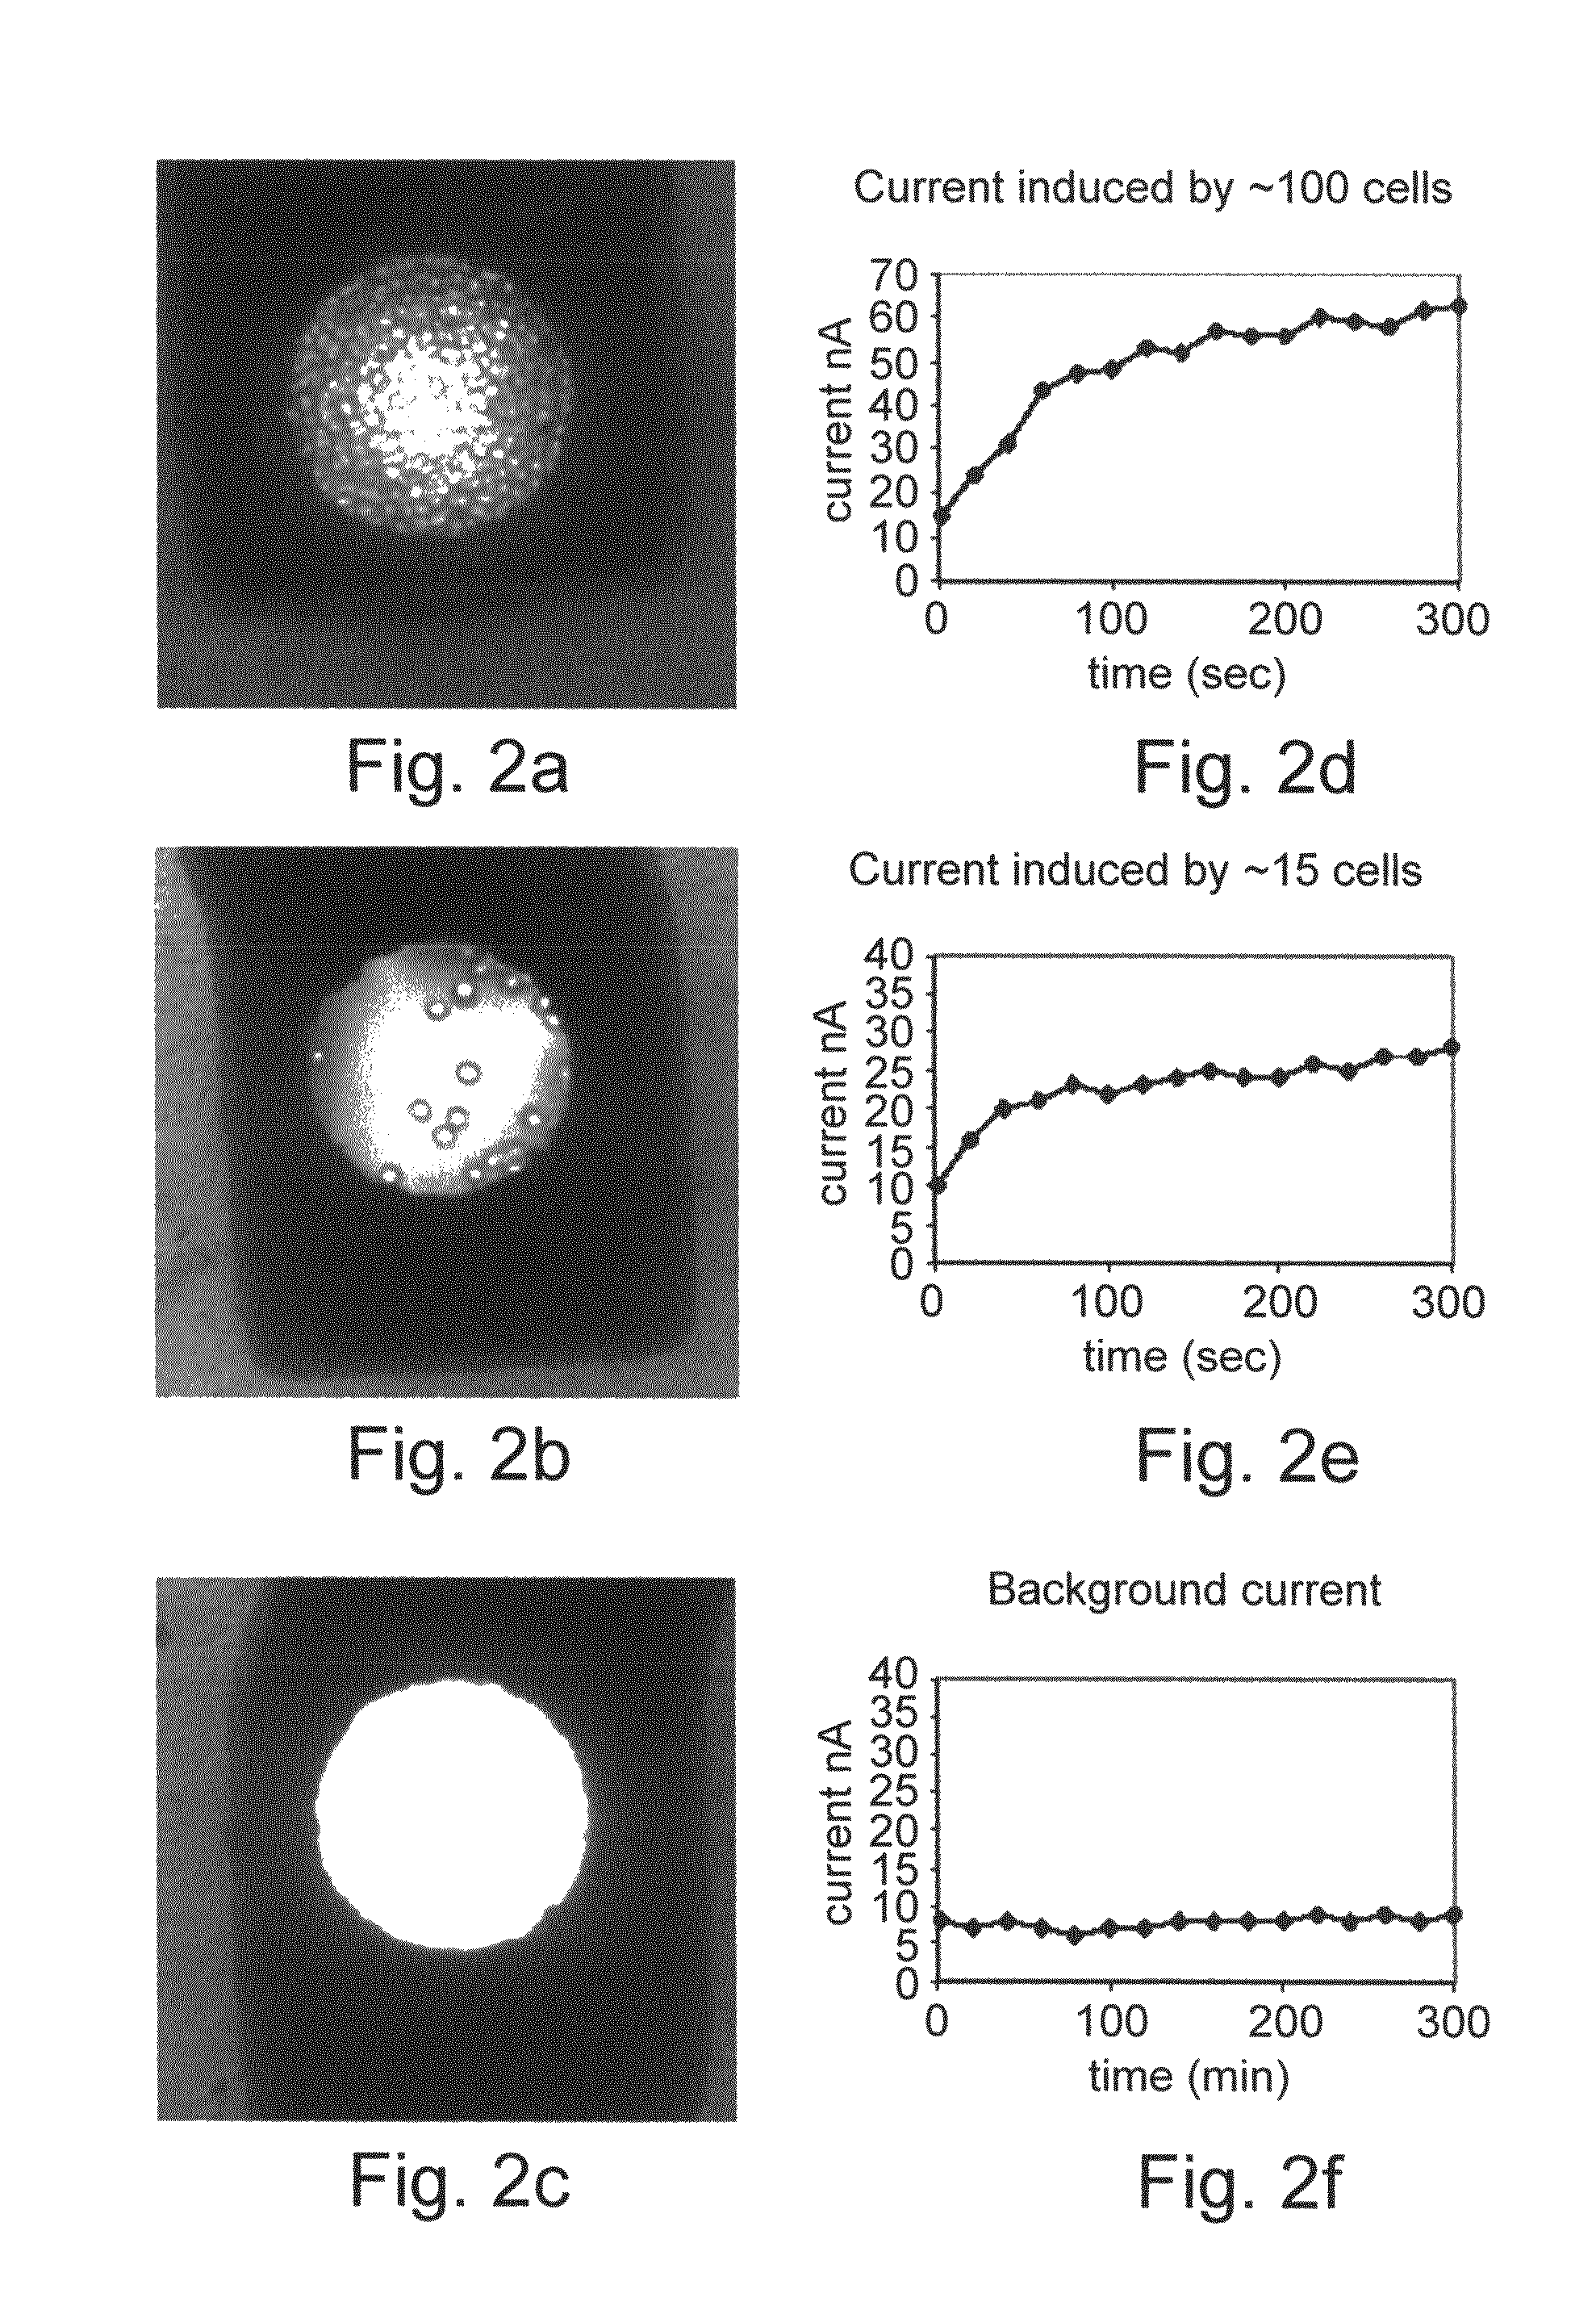 Electrochemical methods of detecting colon cancer cells and use of same for diagnosing and monitoring treatment of the disease